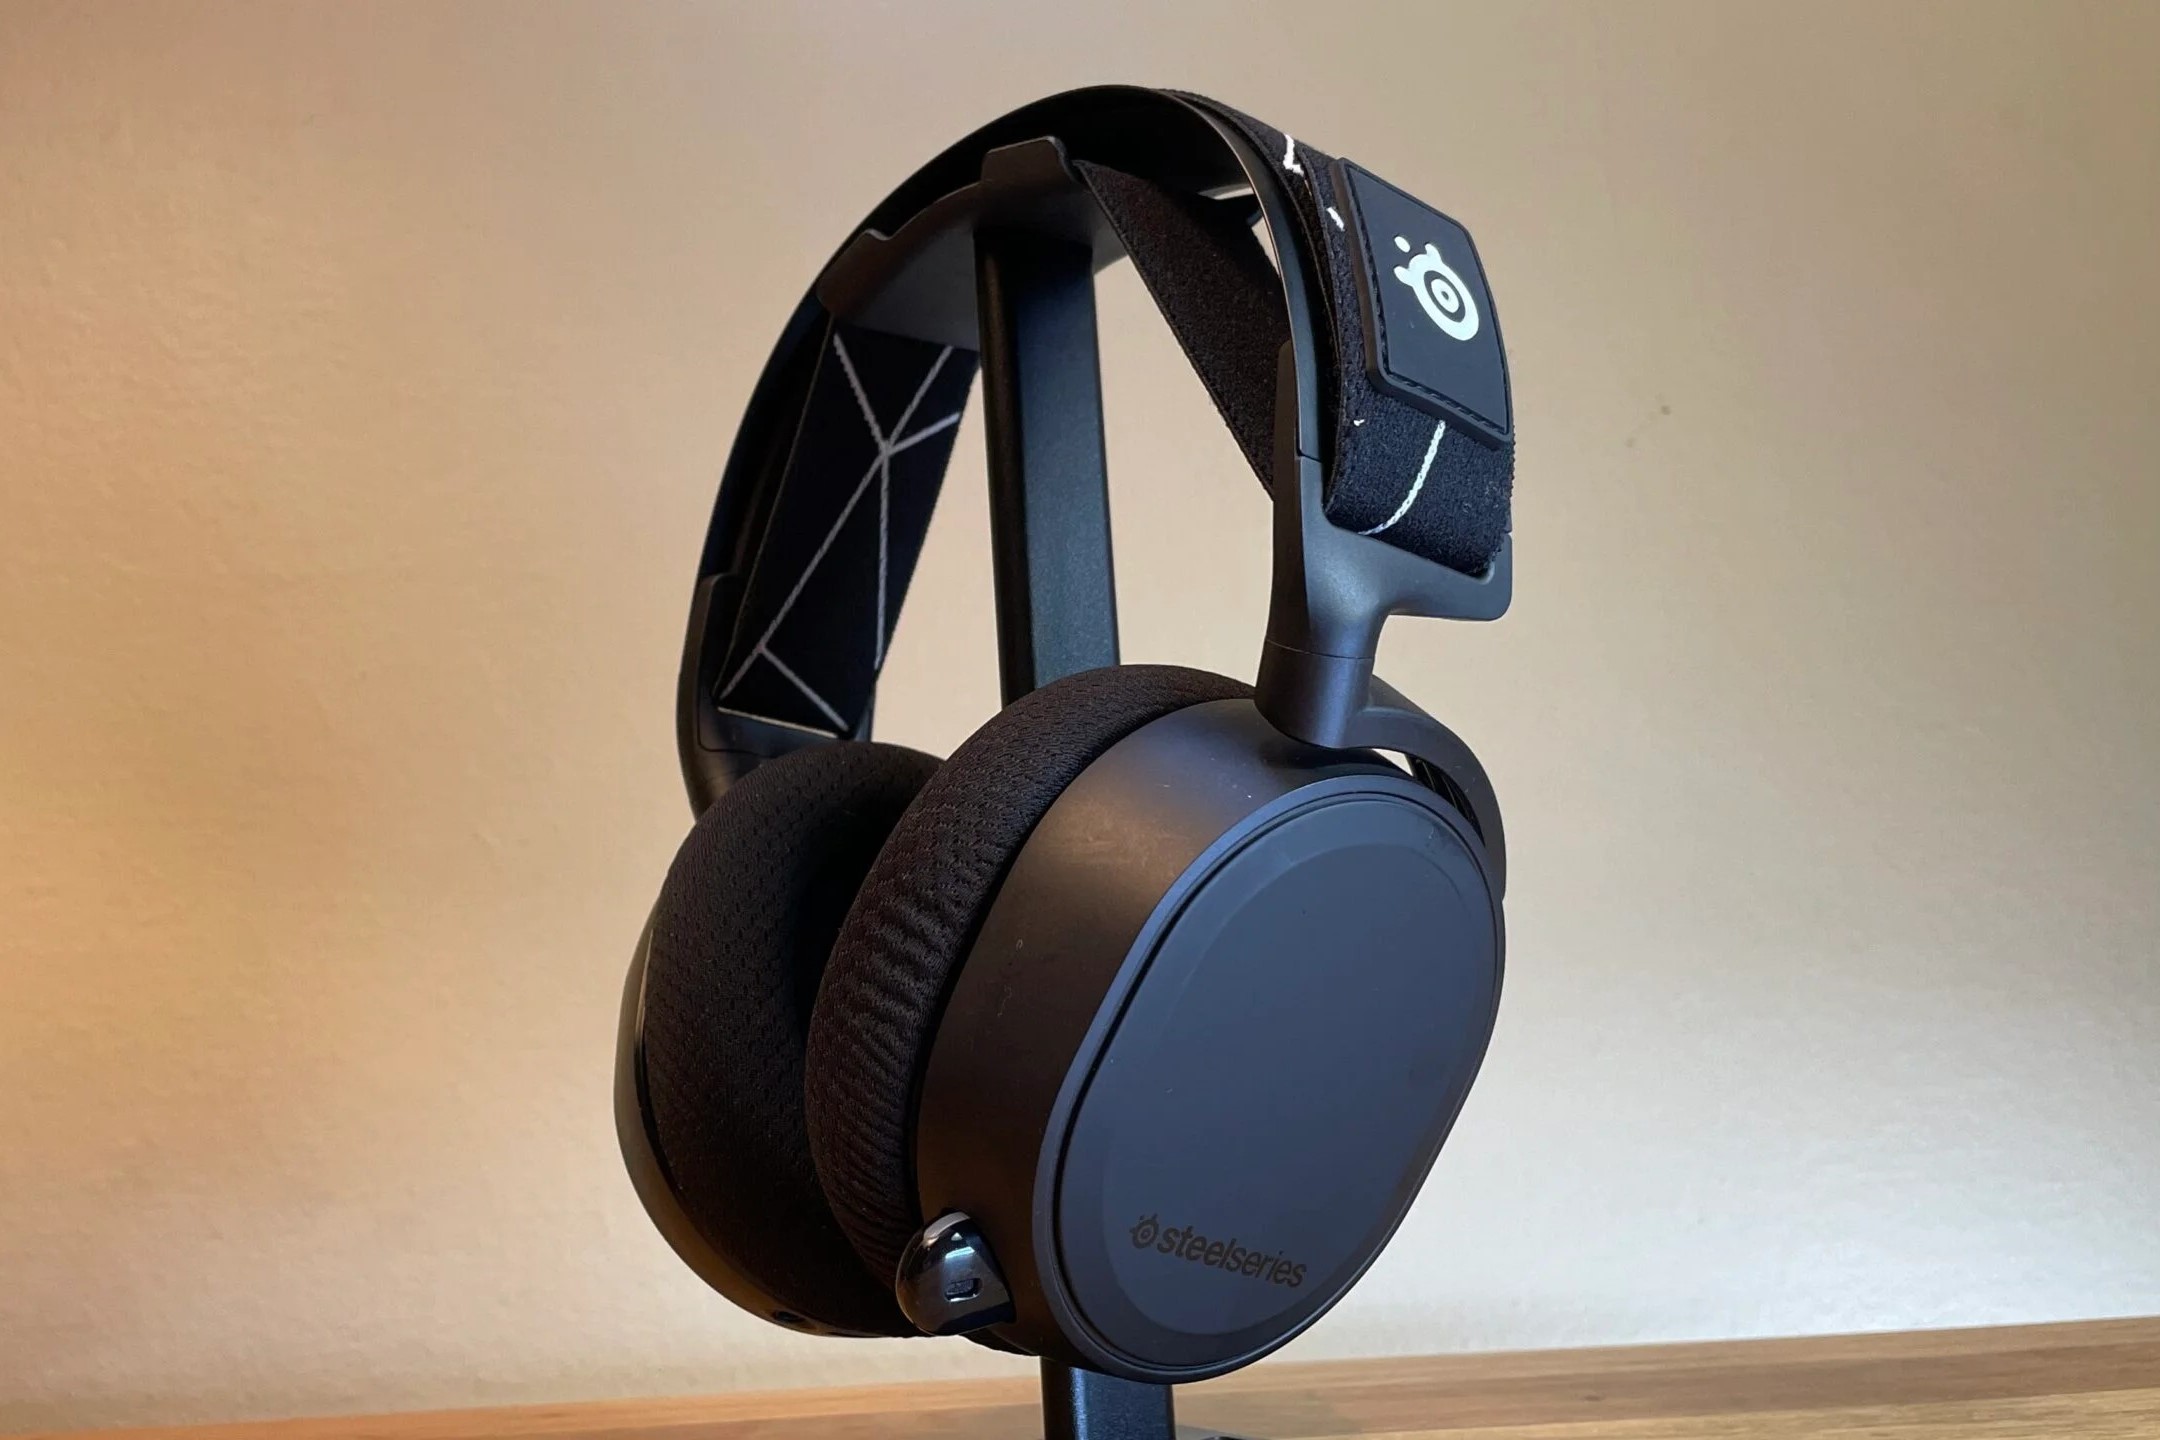 Addressing Charging Problems With SteelSeries Headsets